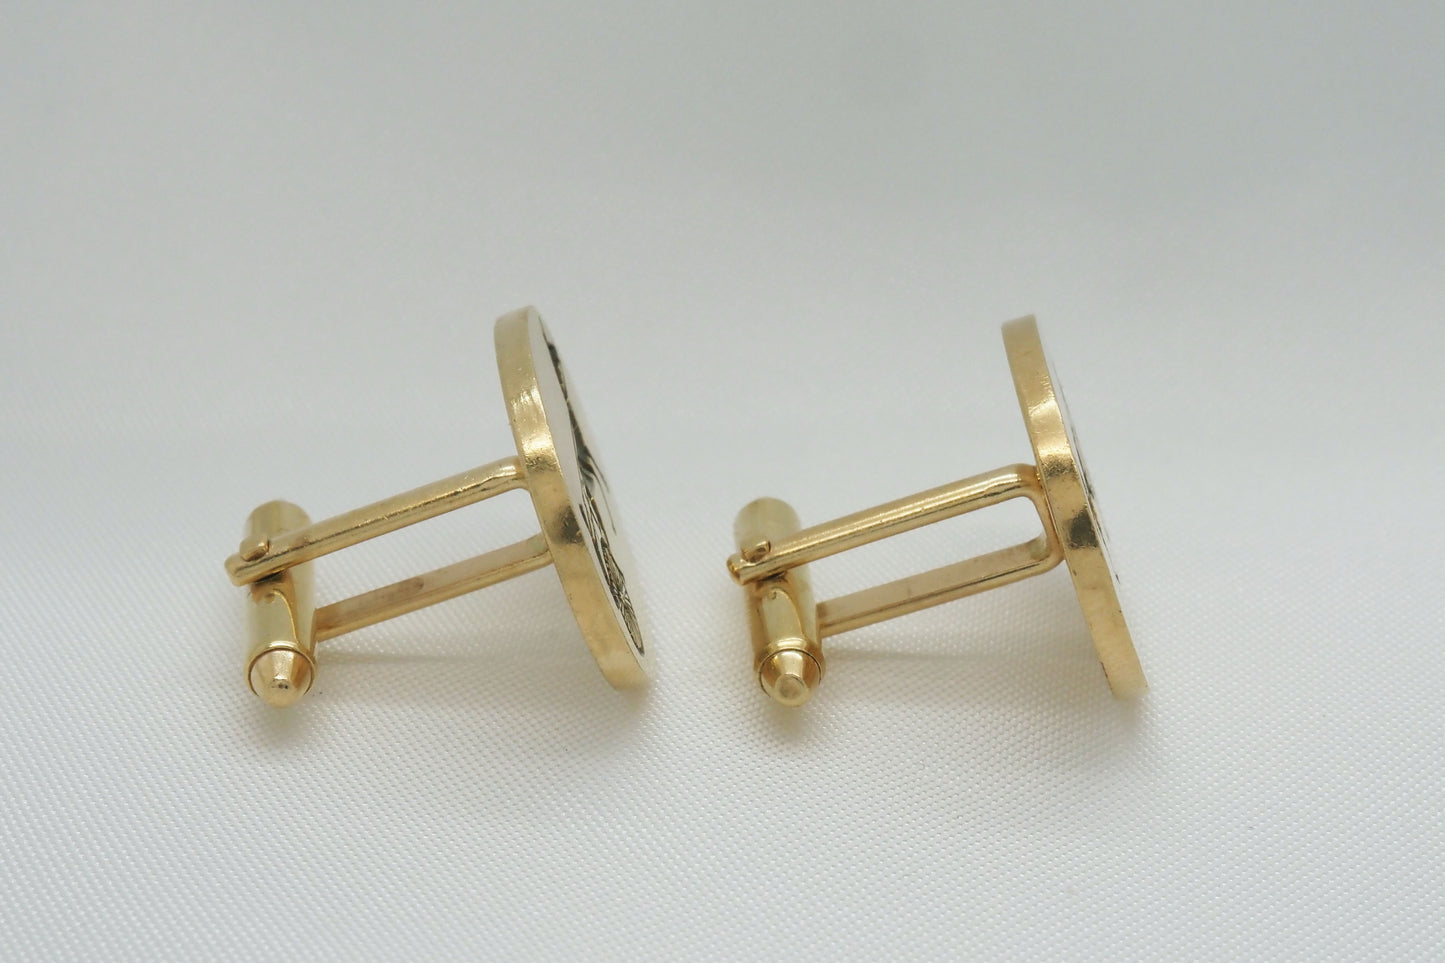 Vintage 14k Yellow Gold Oval Horse & Carriage Cufflinks - 26.6g